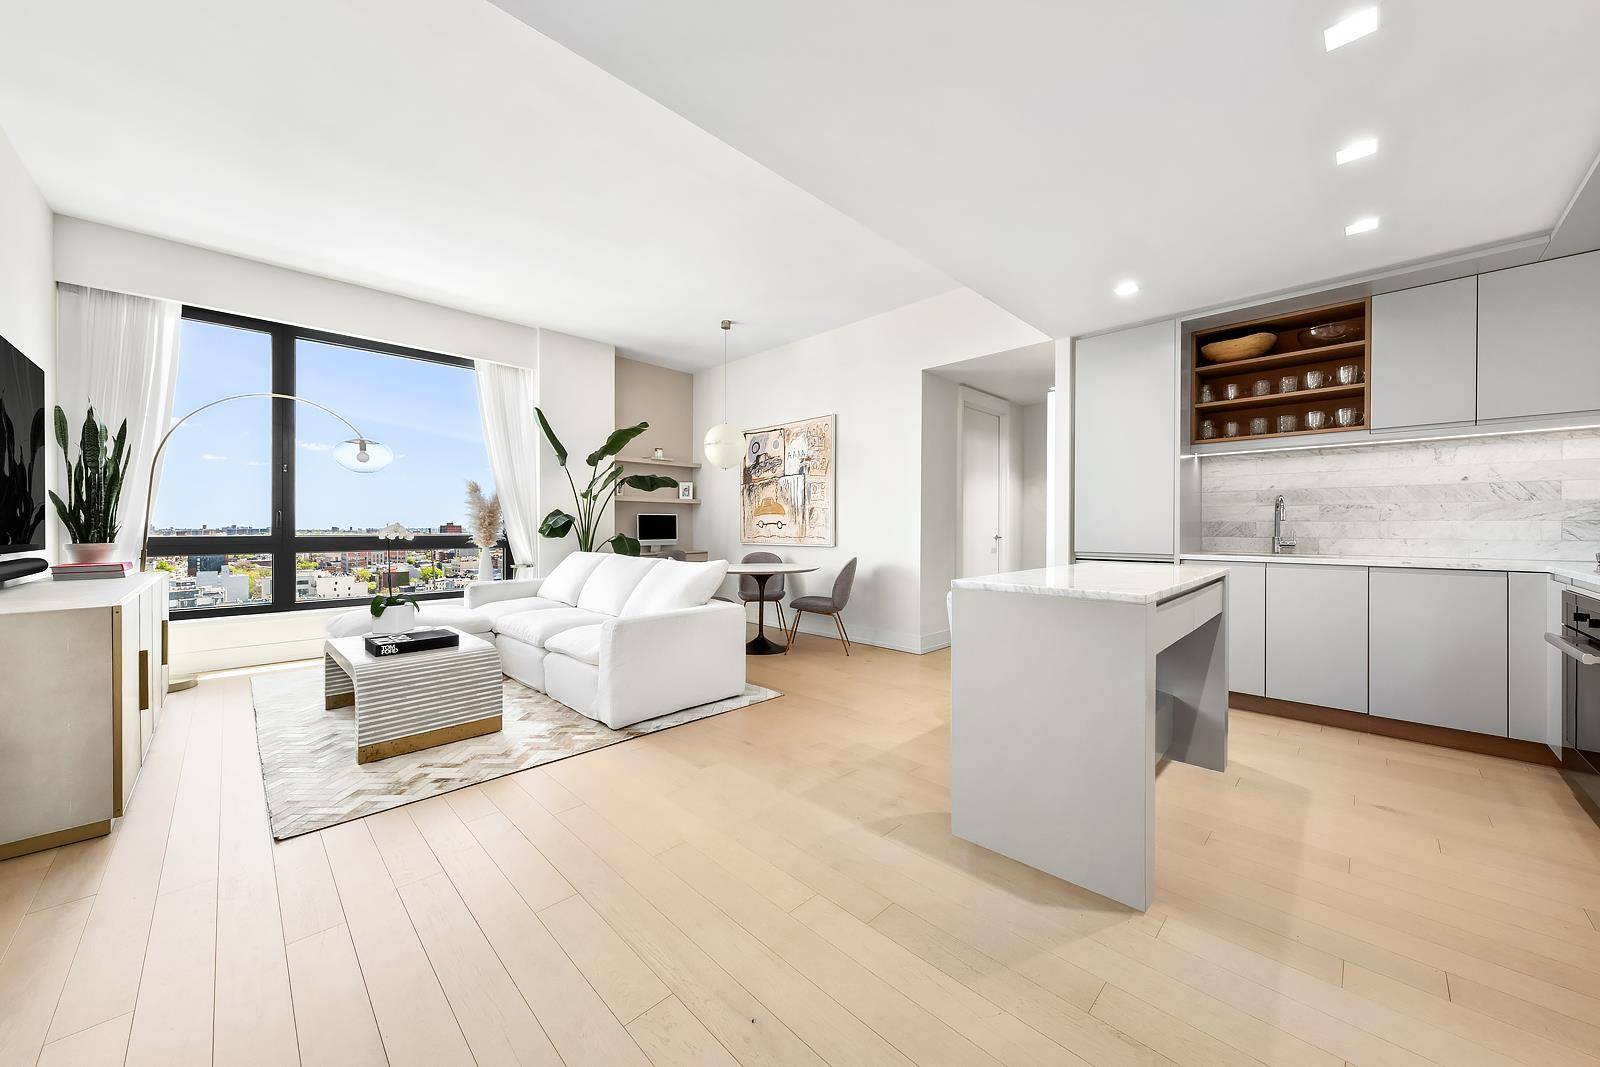 Introducing a sophisticated urban oasis in Brooklyn This generously sized, high floor, 2 bedroom, 2 Bathroom Condominium offers unobstructed views of Brooklyn, Queens and Long Island.